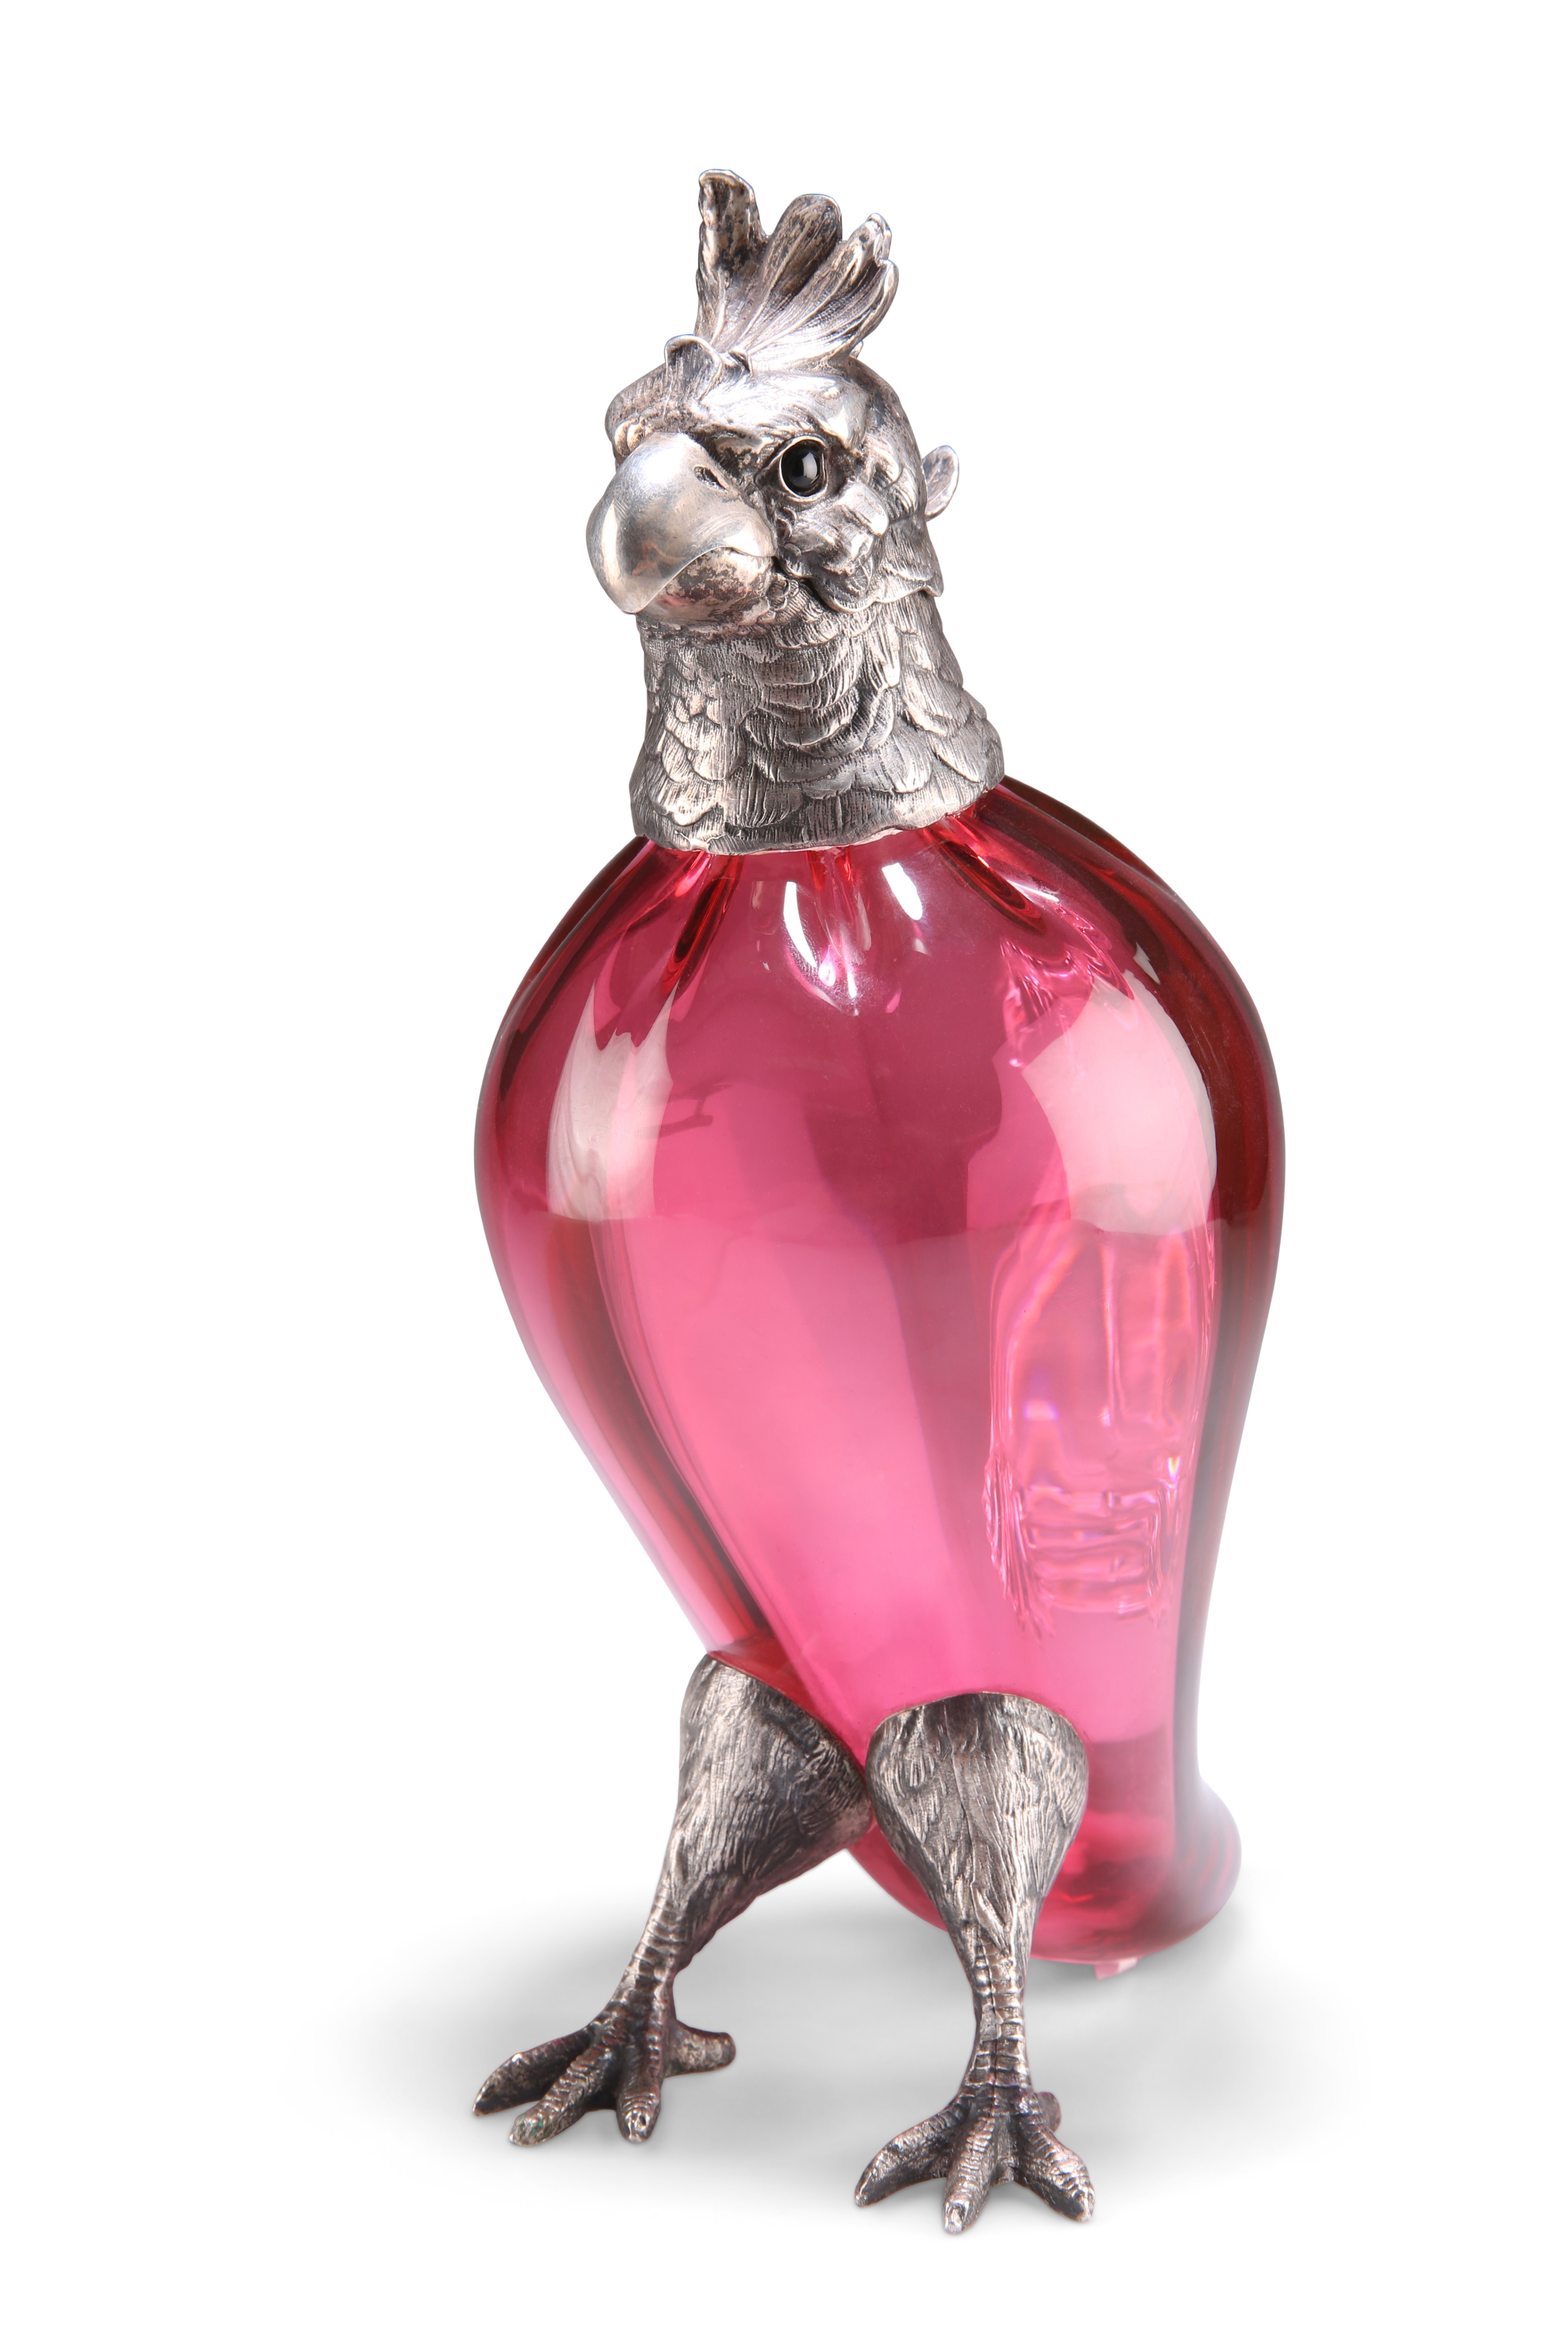 A LARGE SILVER-MOUNTED CRANBERRY GLASS NOVELTY CLARET JUG - Image 3 of 10